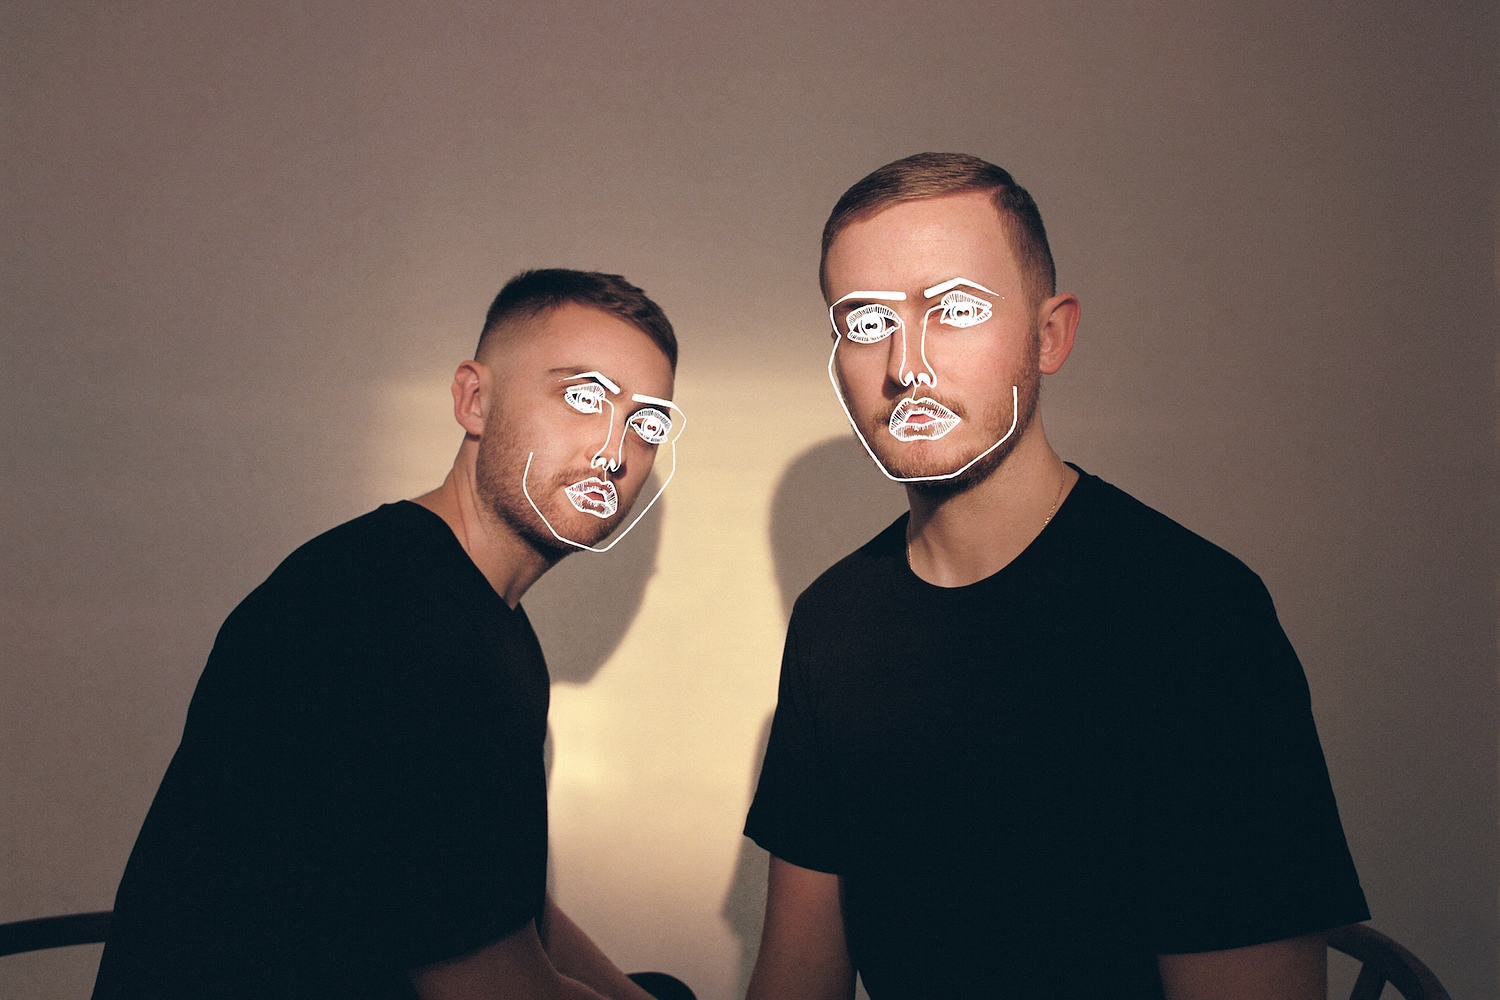 Disclosure throw a dance party in 'Watch Your Step' video